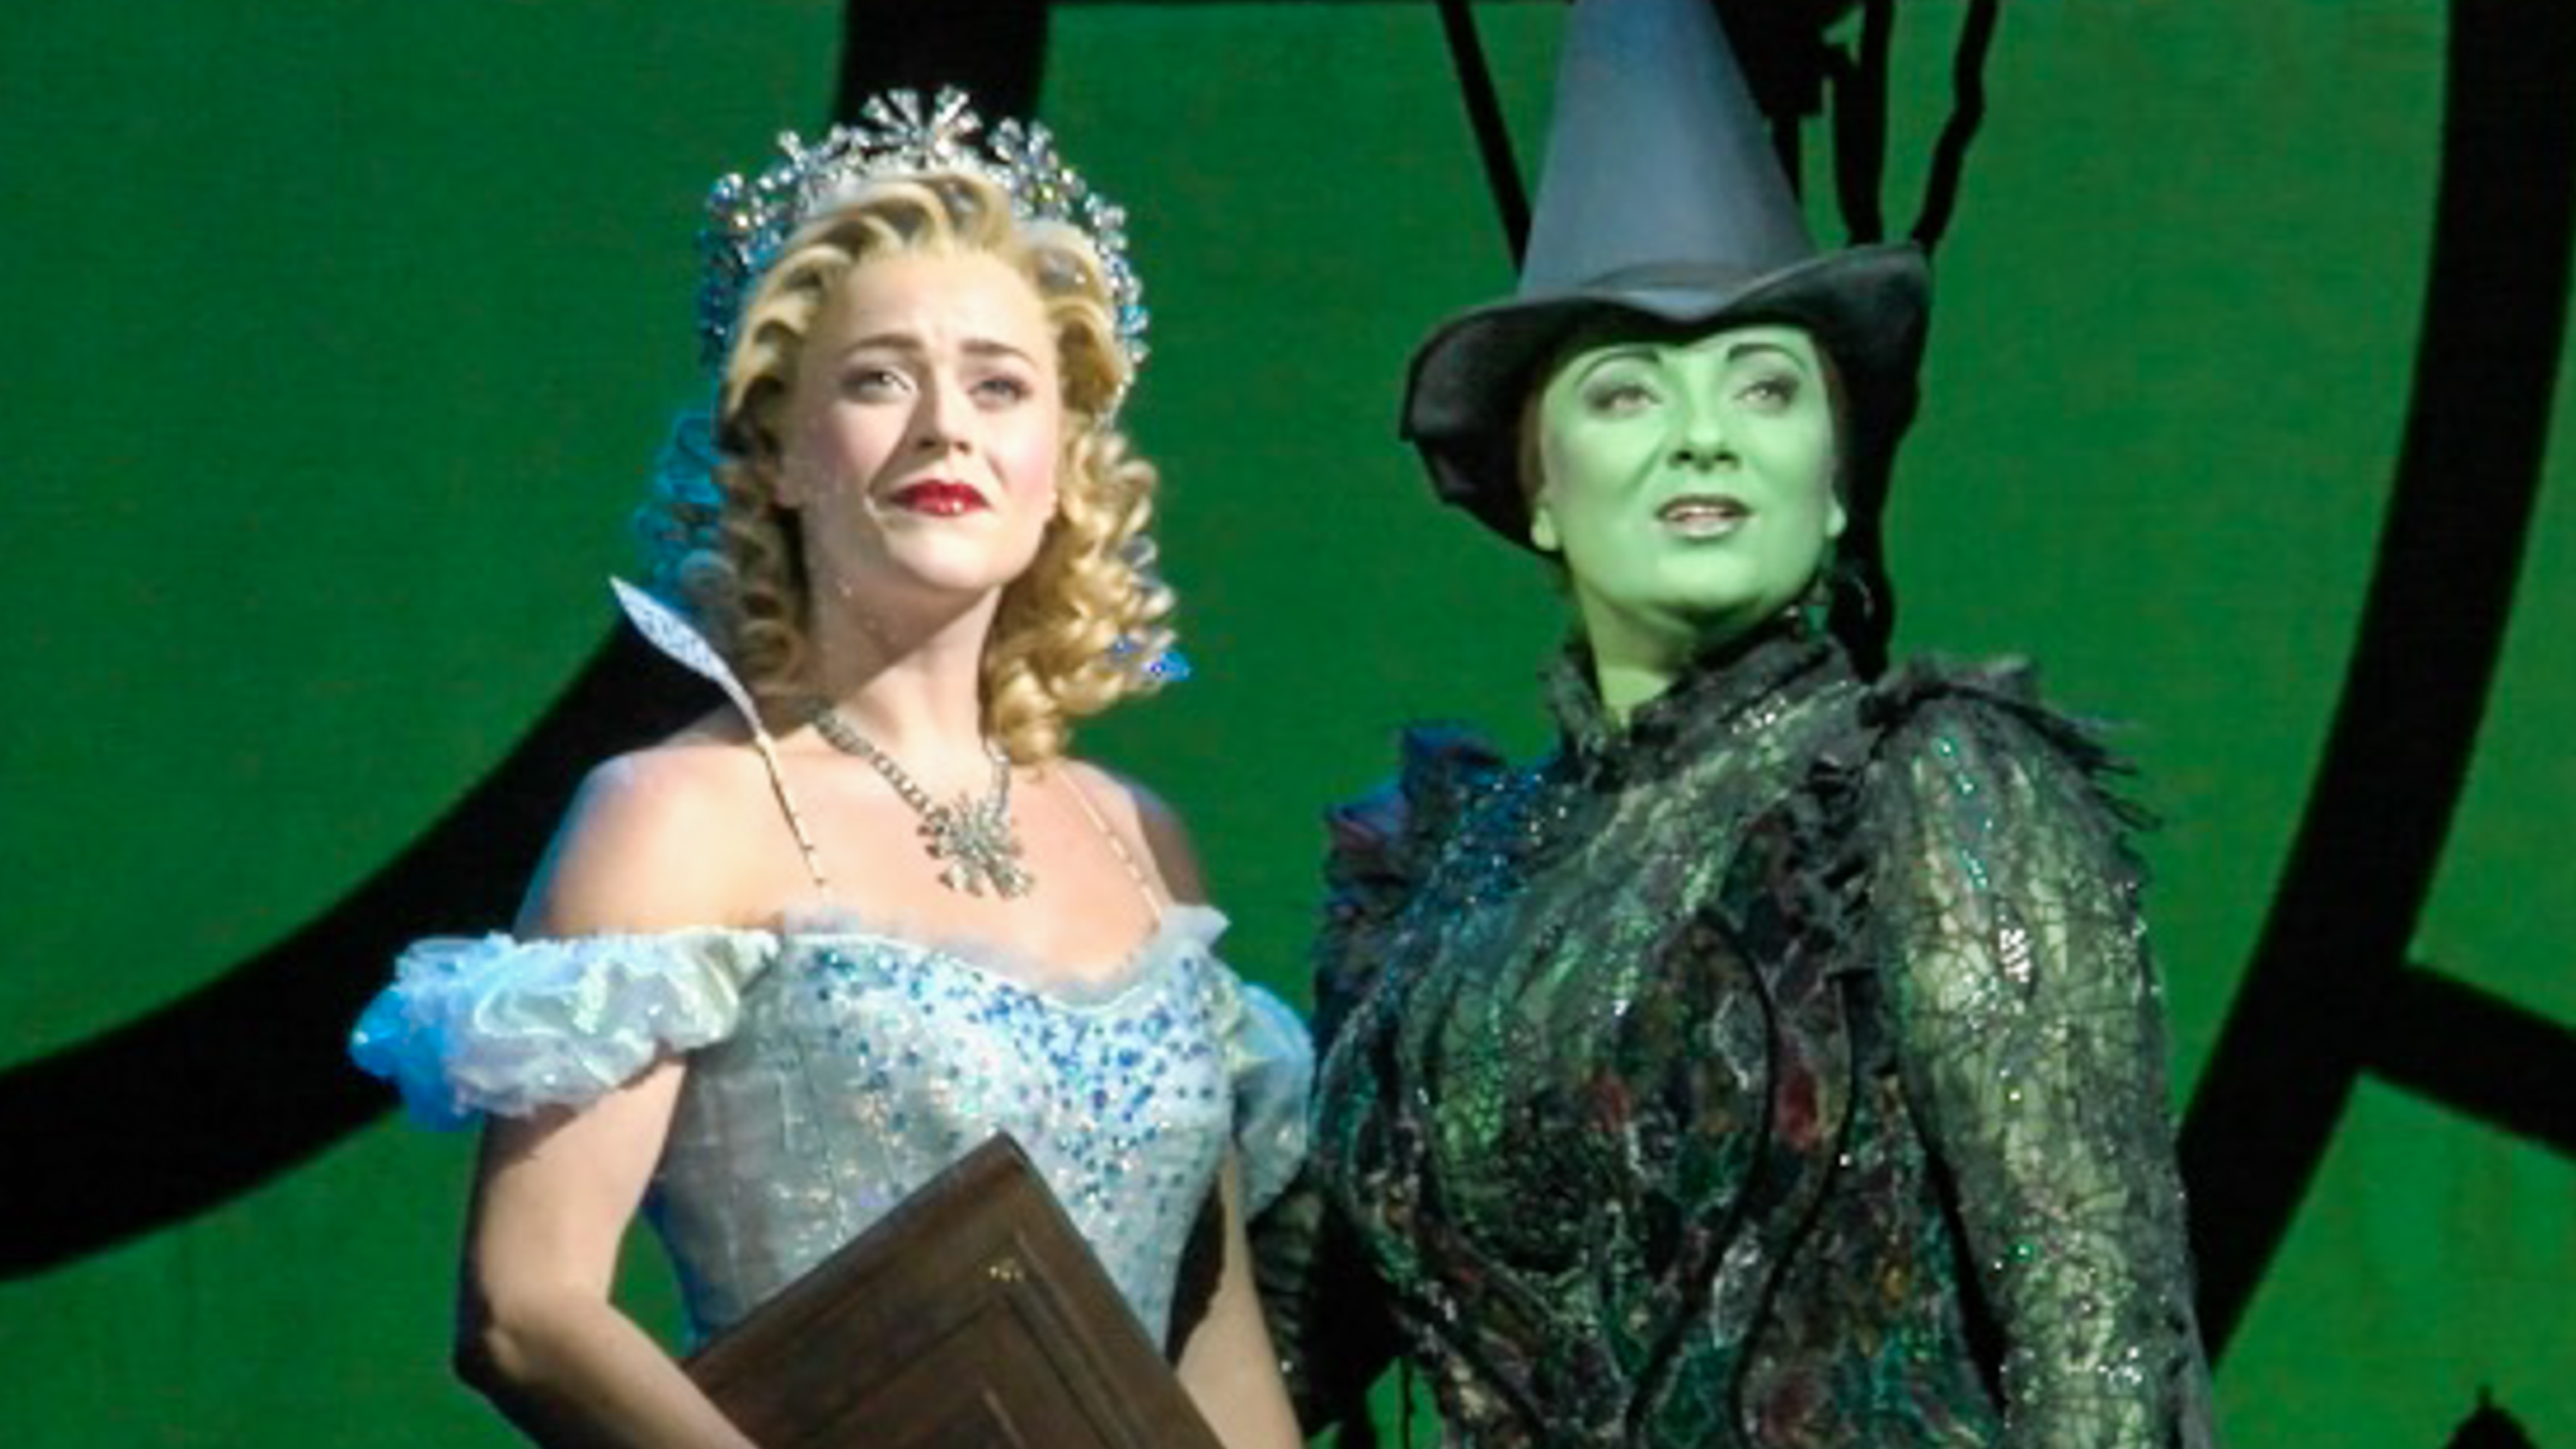 WATCH Emotional 'For Good' performance from 'Wicked' Manila stars